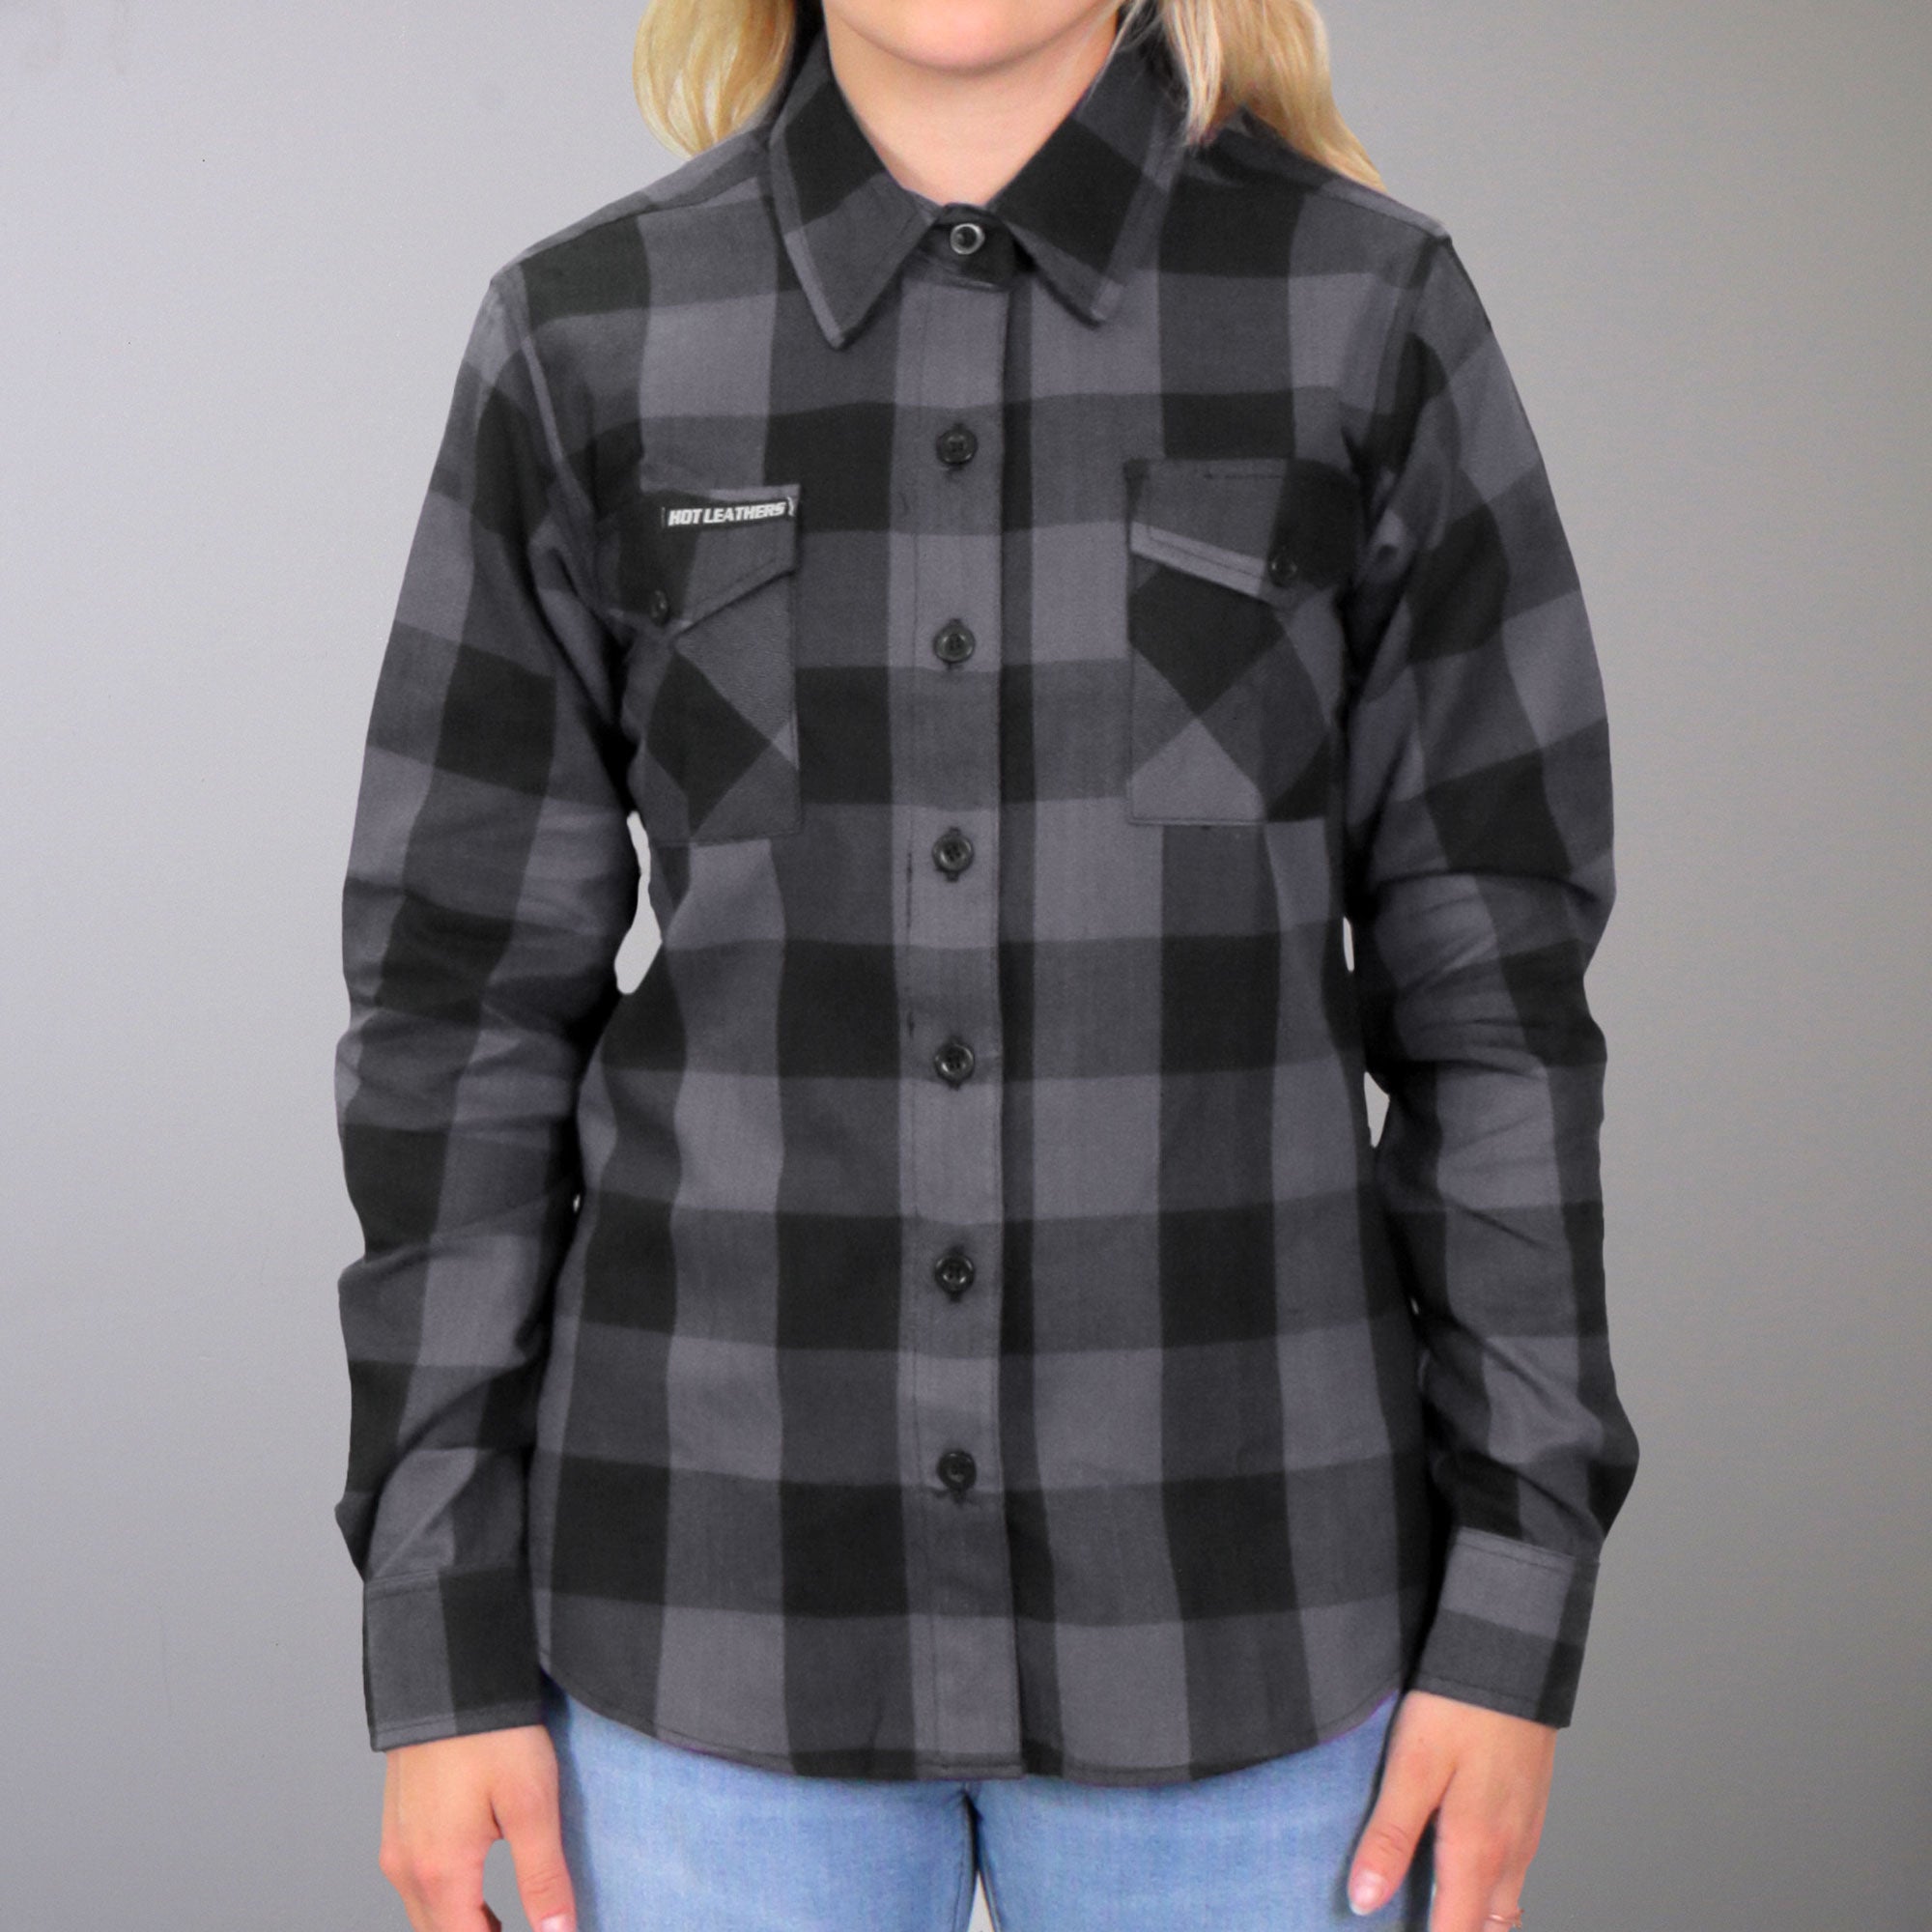 Hot Leathers FLL3001 Ladies Long Sleeve Cotton Black and Gray Flannel